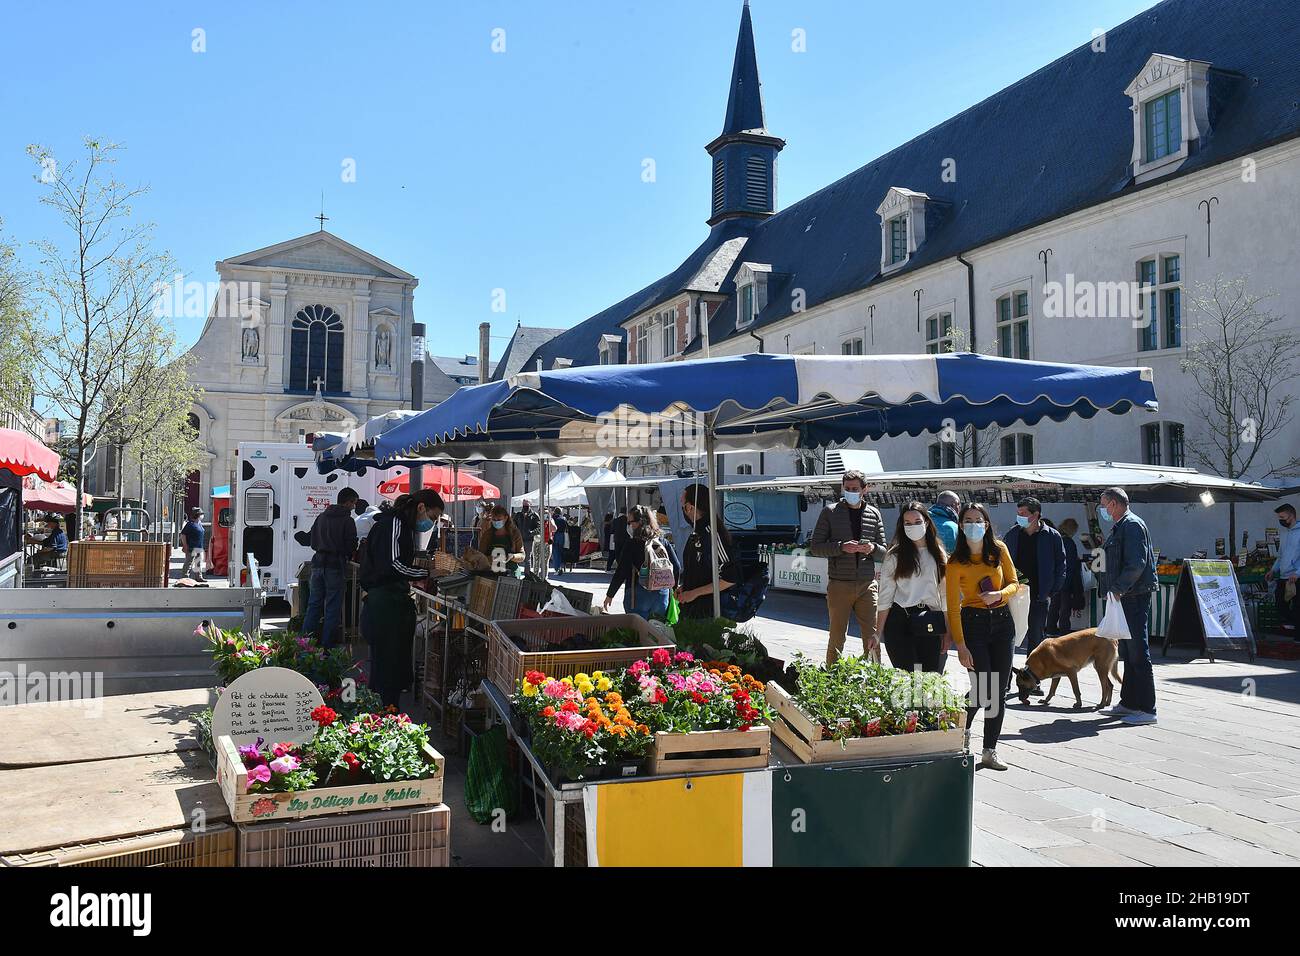 Reims (Francia nord-orientale): Mercato in piazza "Place MUSEUX" Foto Stock